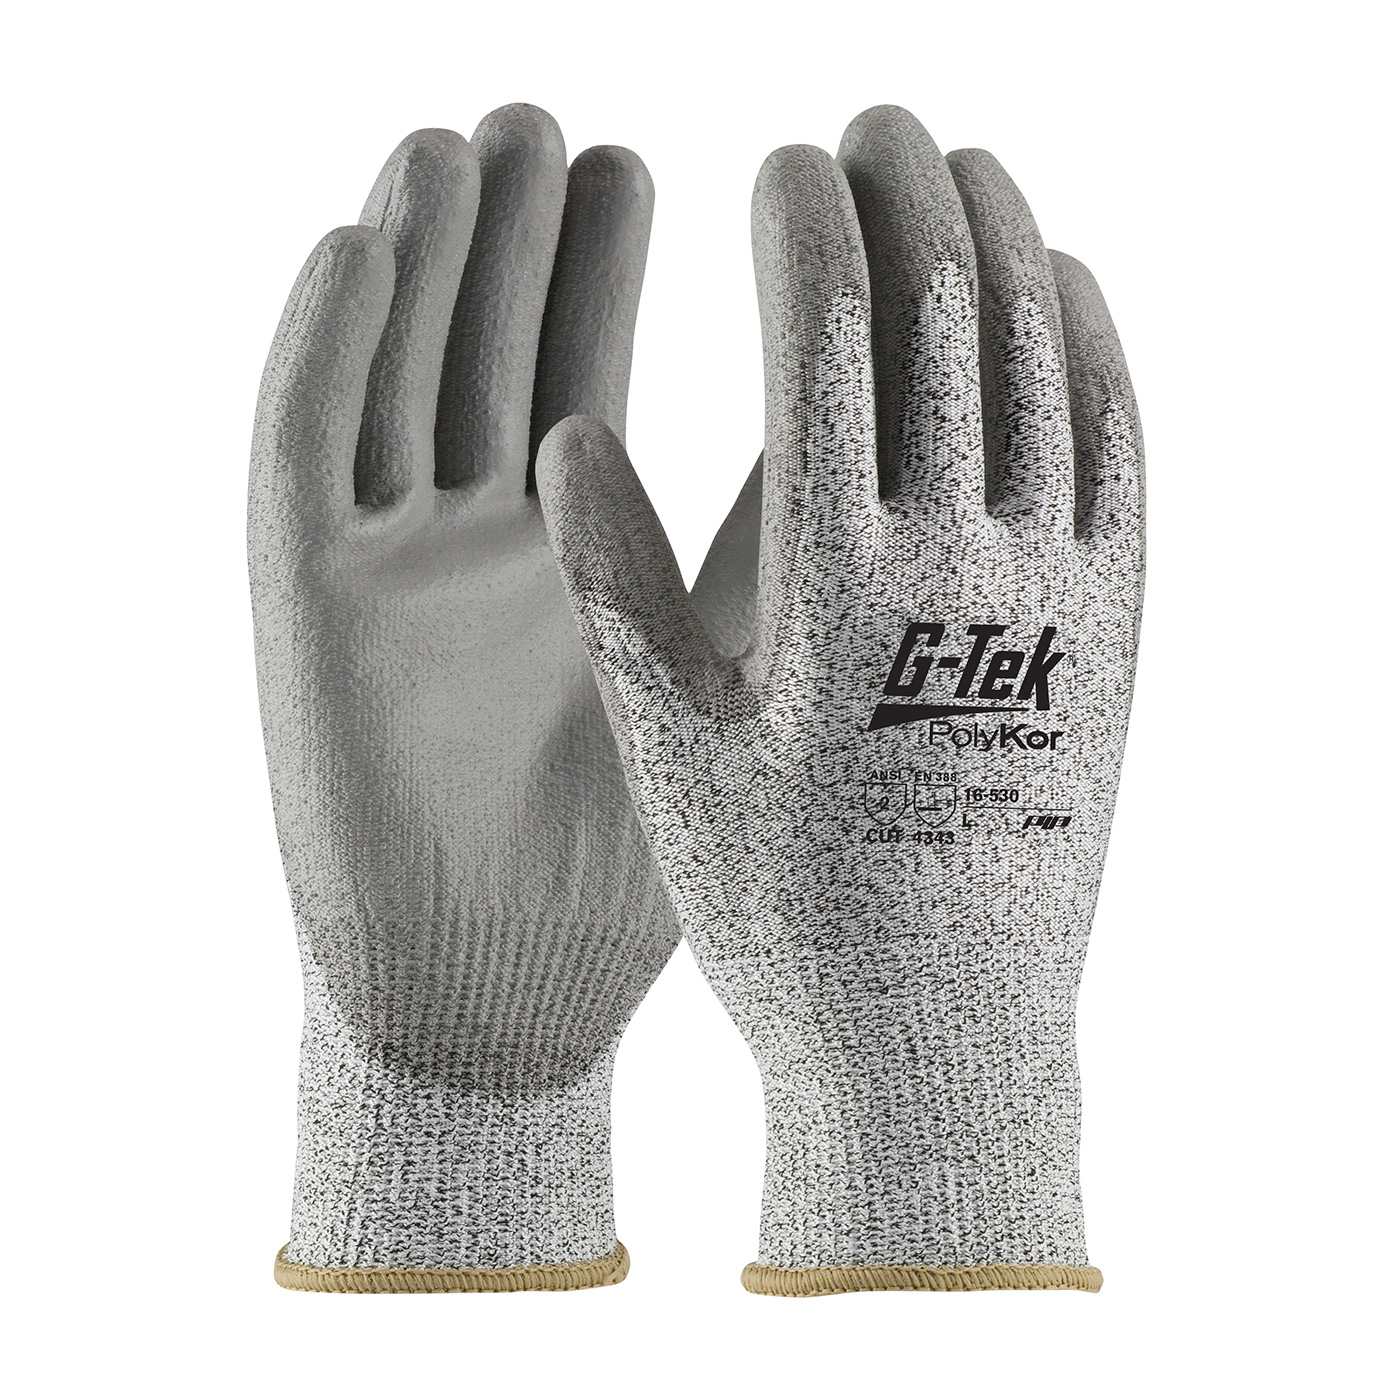 PIP 16-530/M G-Tek PolyKor Seamless Knit PolyKor Blended Glove with Polyurethane Coated Smooth Grip on Palm & Fingers - Medium PID-16 530 M